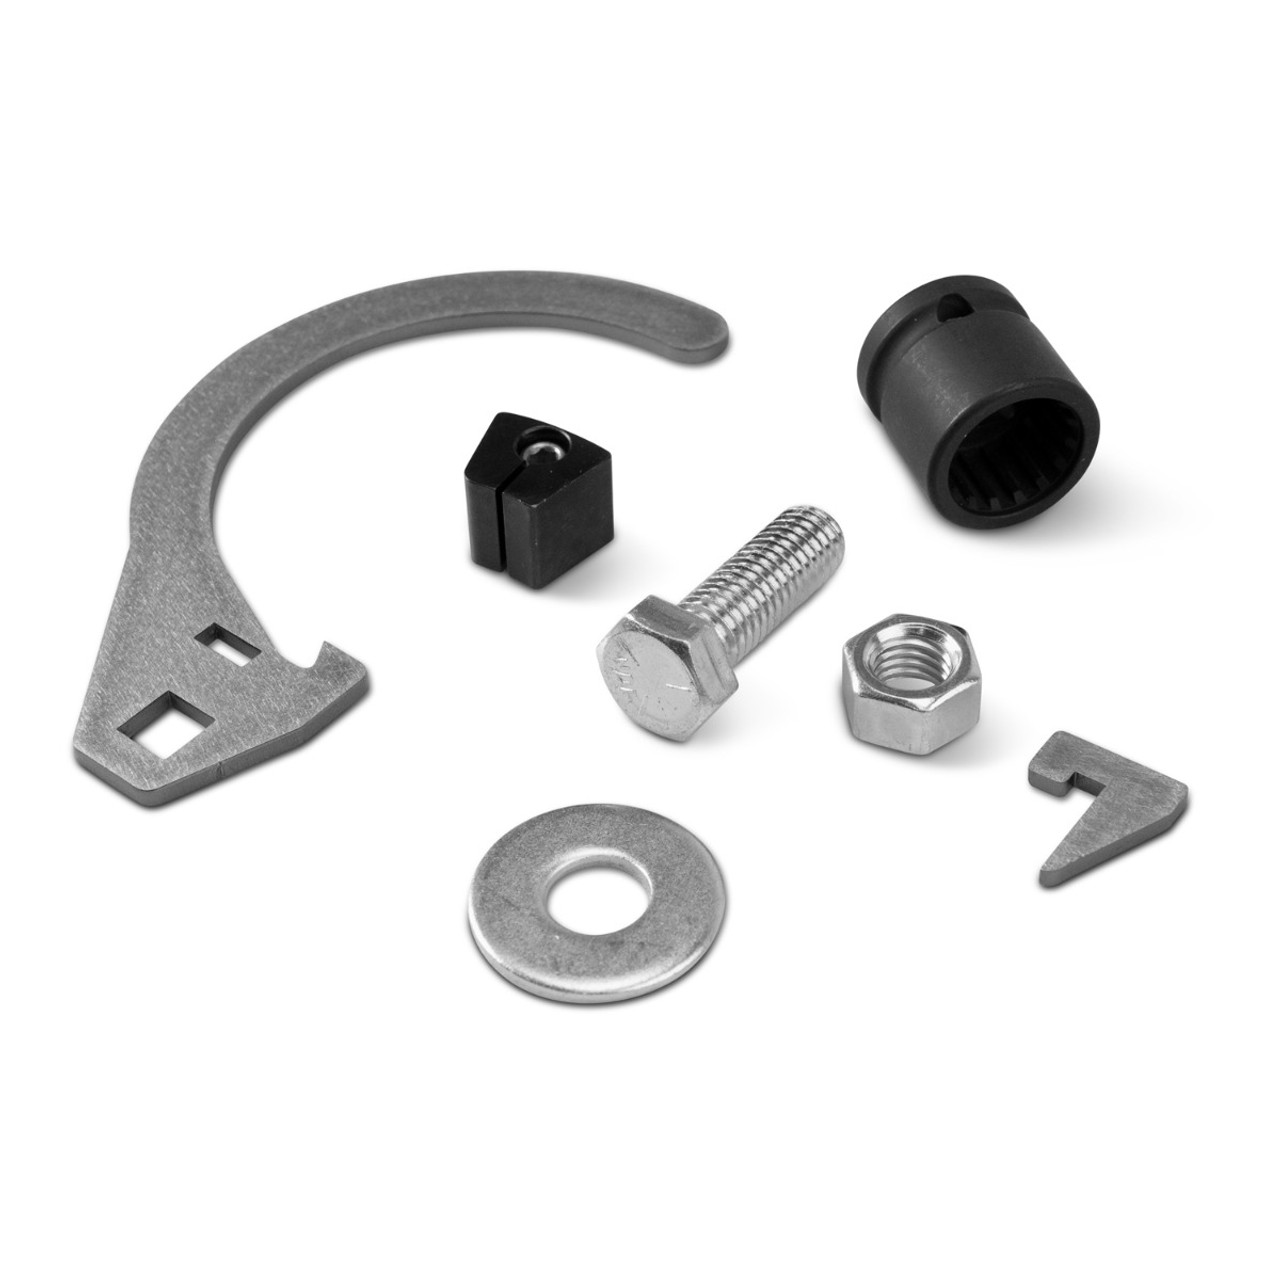 Comp Cams Cam Phaser Lockout Kit for Ford 7.3L Godzilla Engine